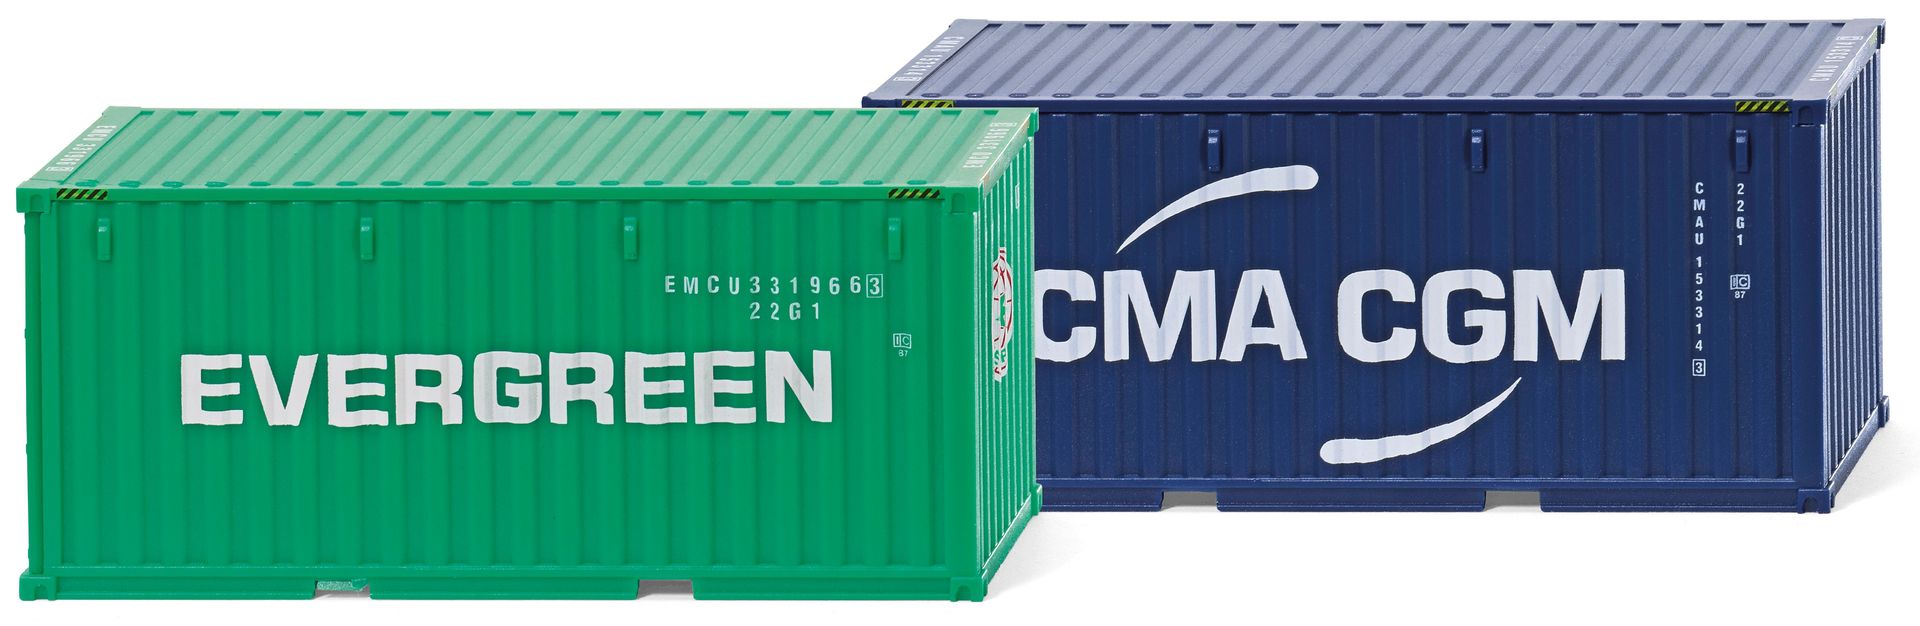 Wiking 001814 - Zubehörpackung - 20' Container Evergreen CMA CGM H0 1:87